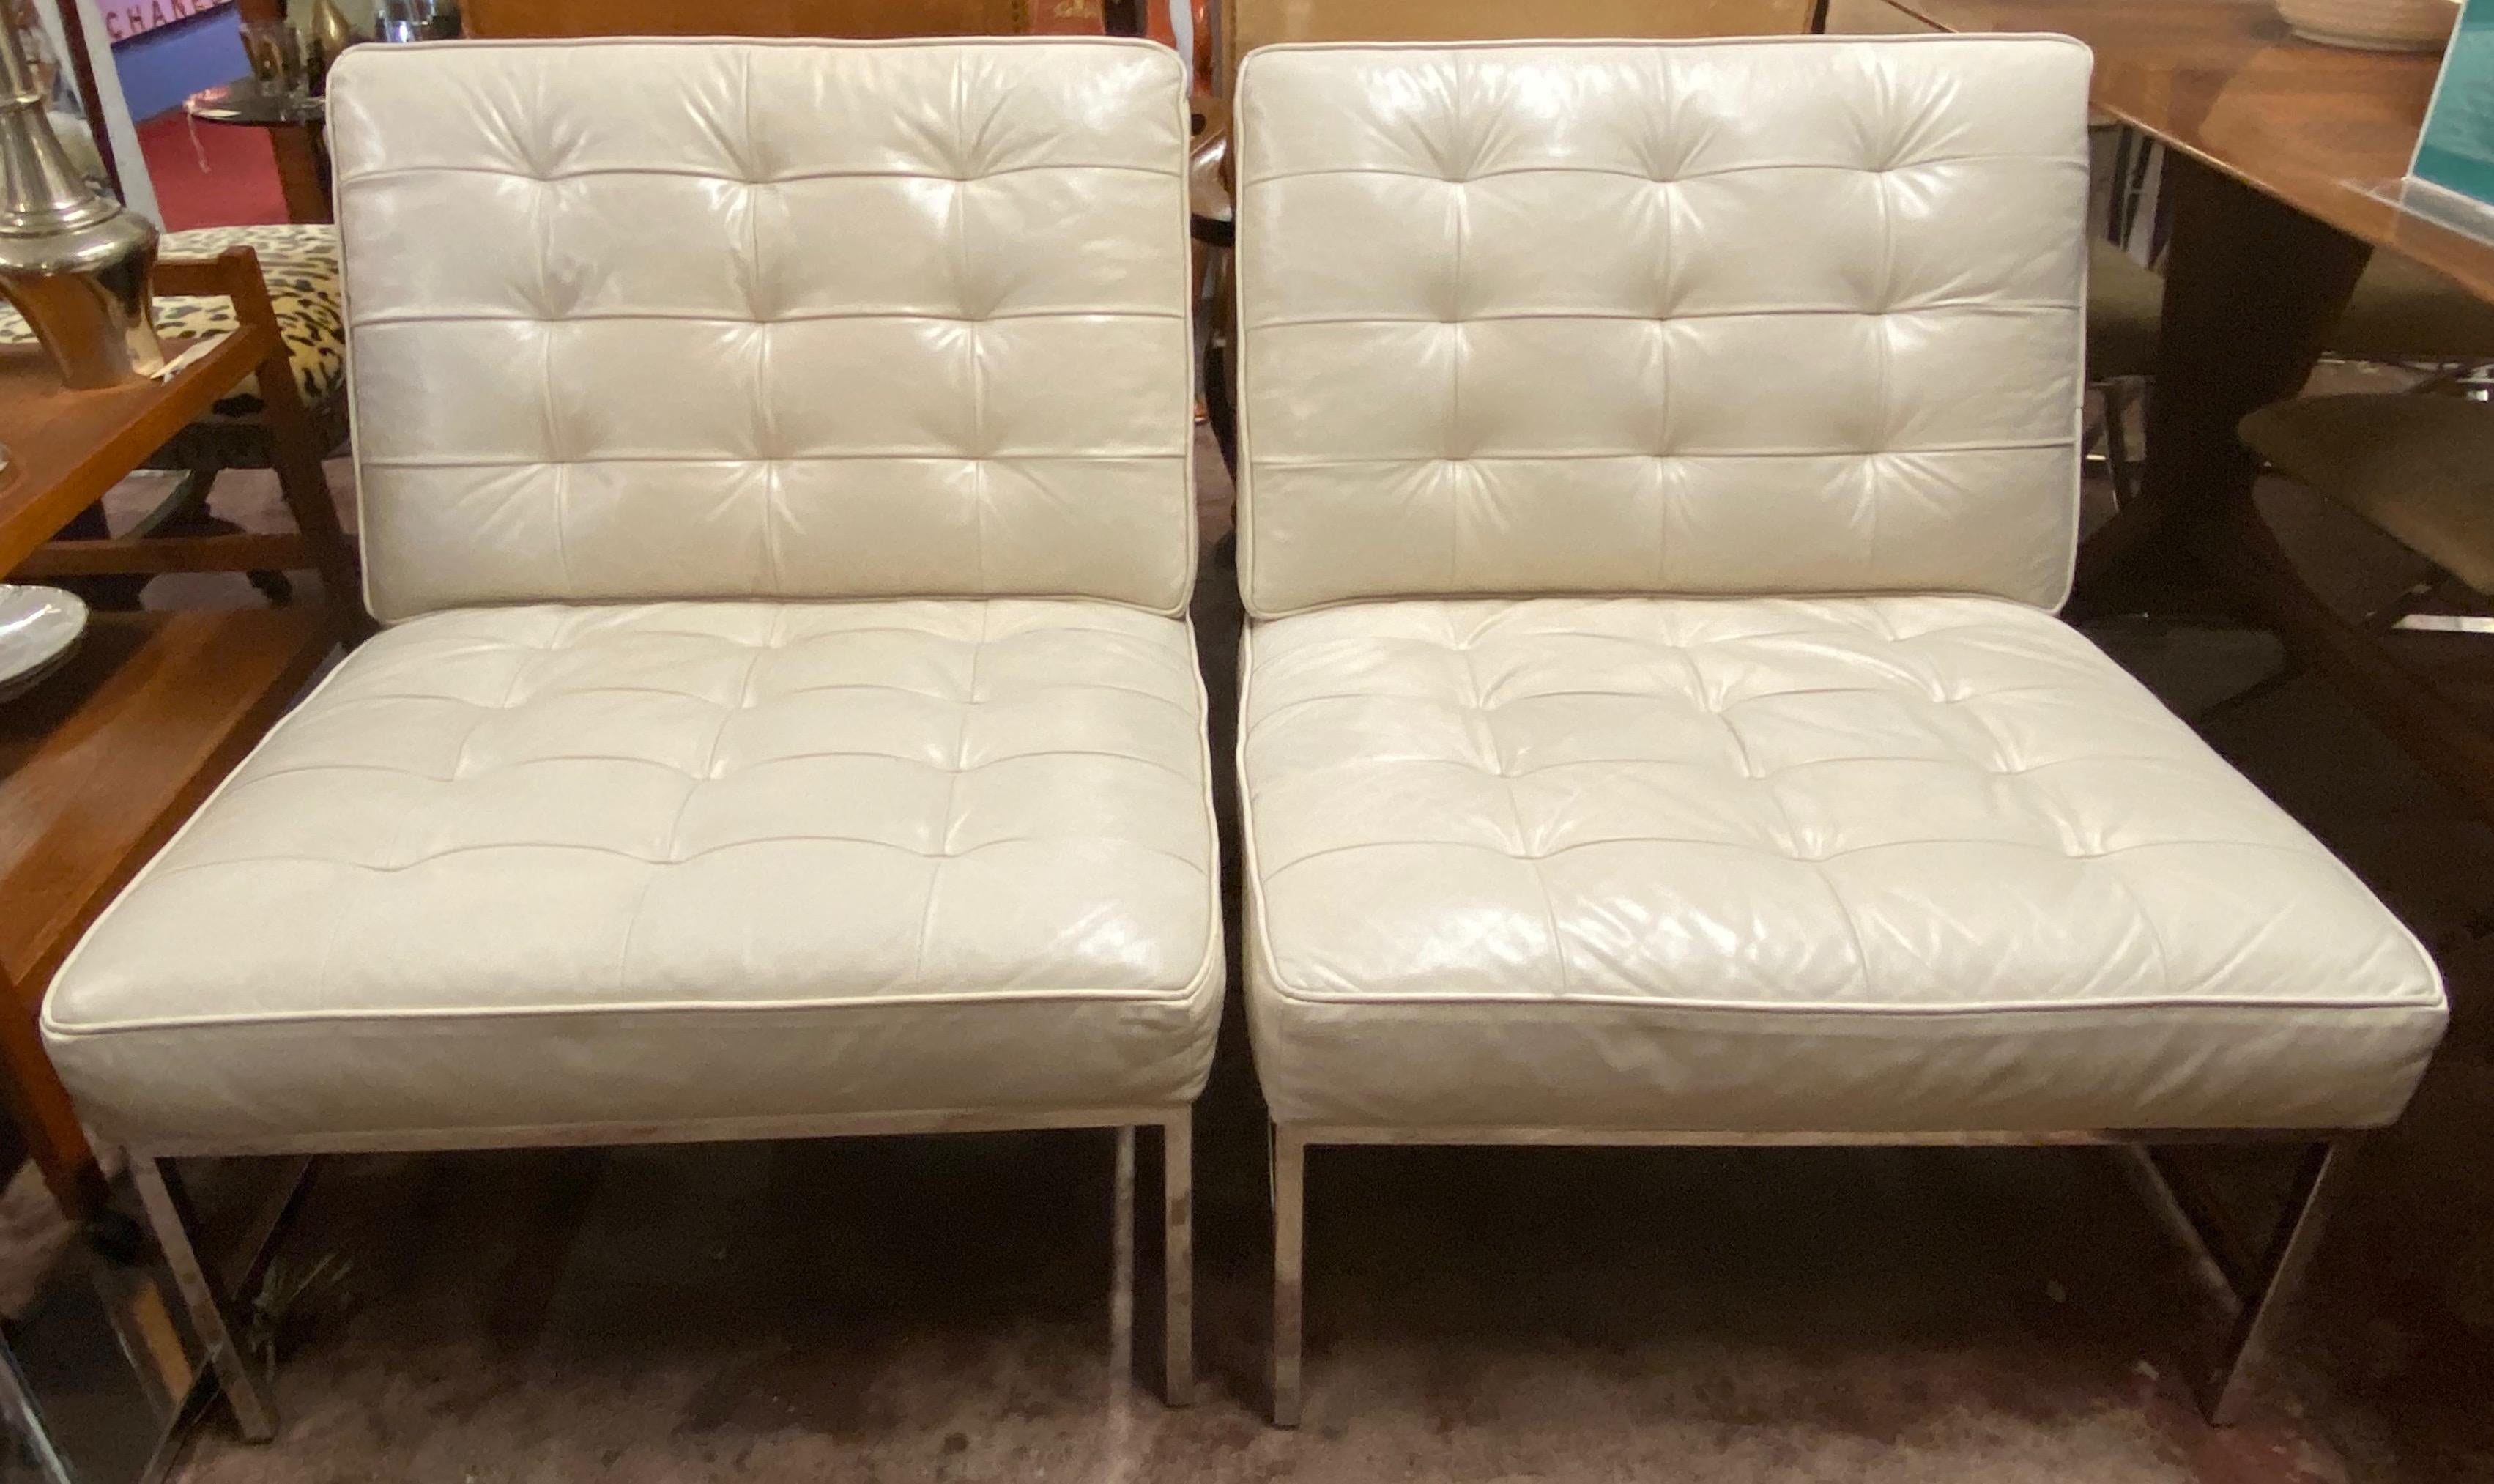 Pair of Mitchell Gold + Paul Williams leather and chrome side chairs with ottoman

Simply the Best! These chairs are strikingly beautiful and extraordinarily comfortable. They offer wonderful support and are a joy to sit and relax in. The quality